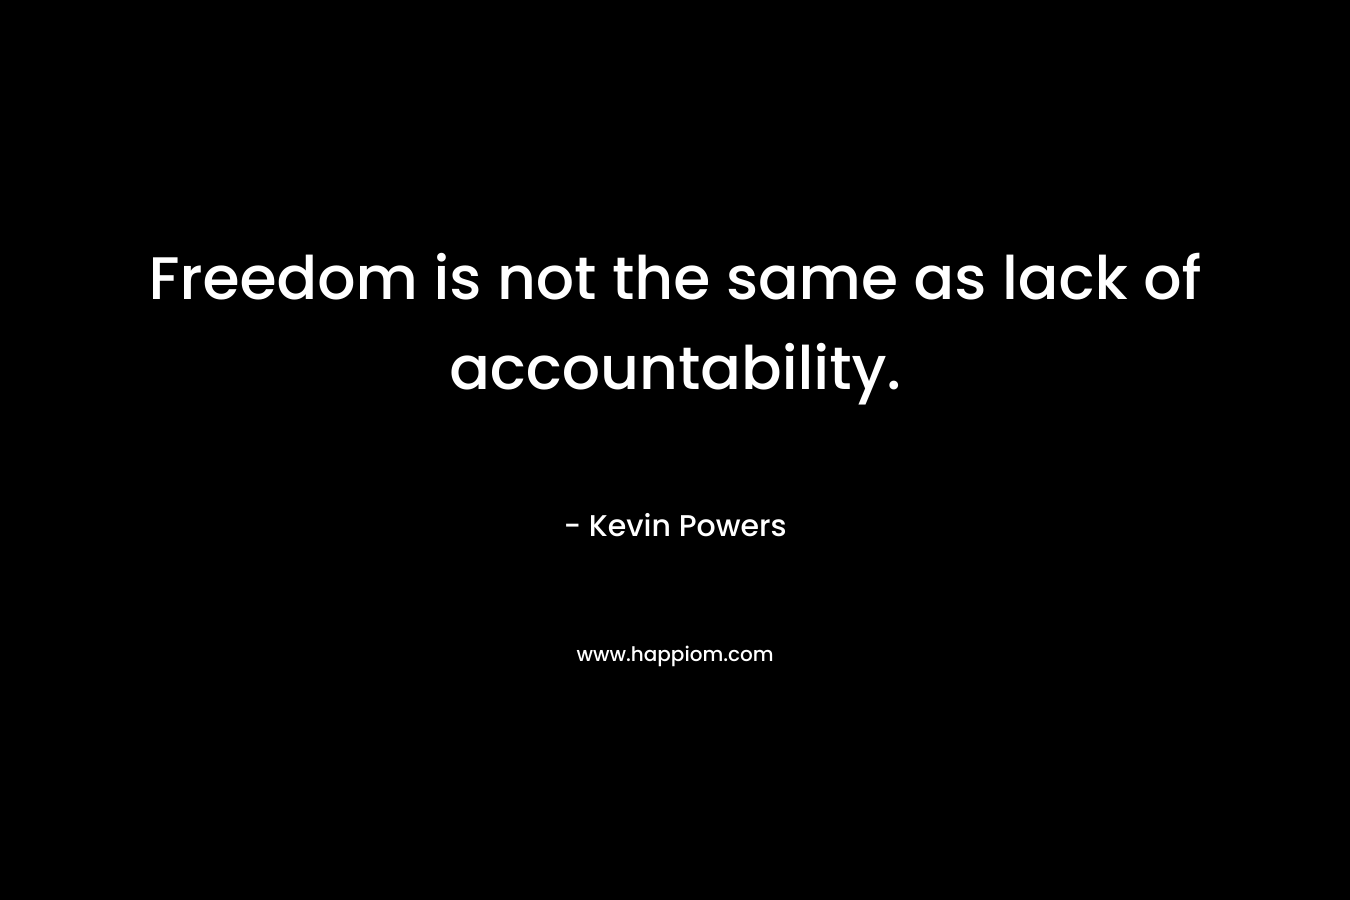 Freedom is not the same as lack of accountability.